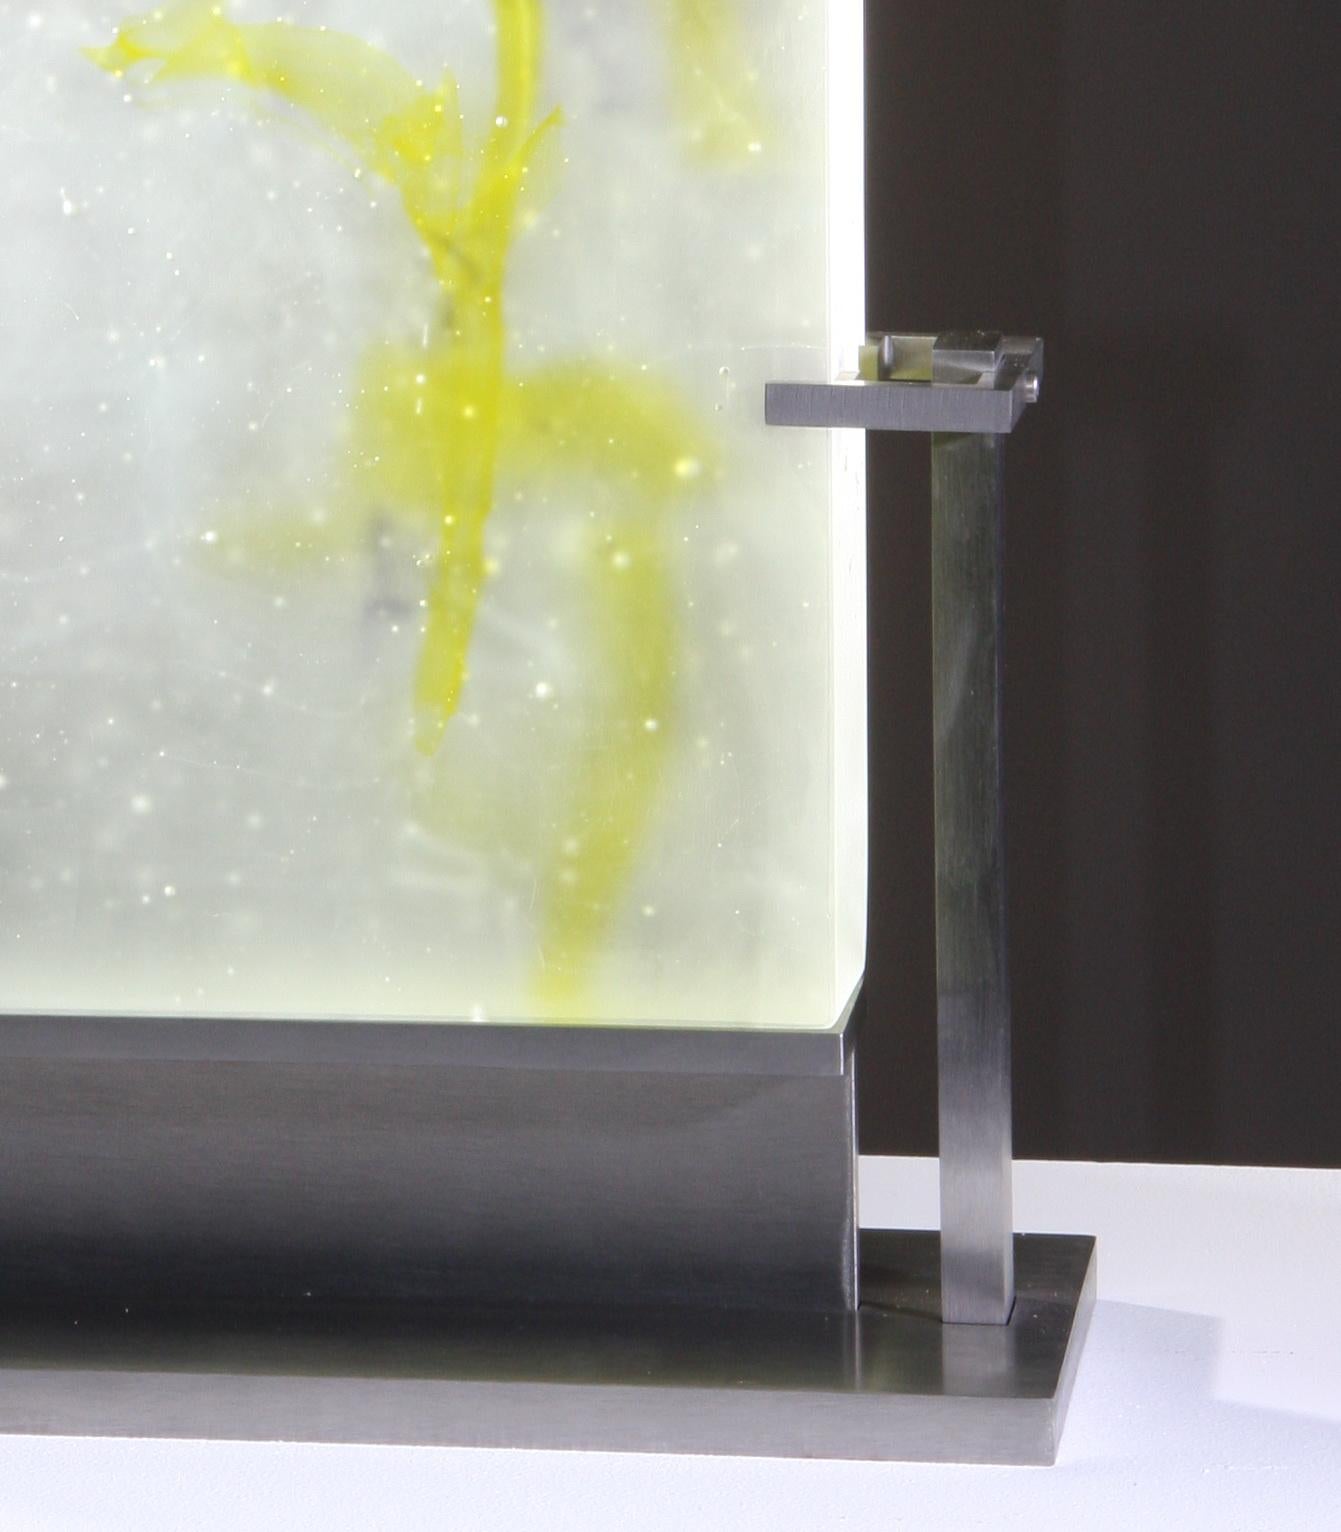 Abstract Cast Glass Sculpture, 'Gabras', 2008 by David Ruth For Sale 1